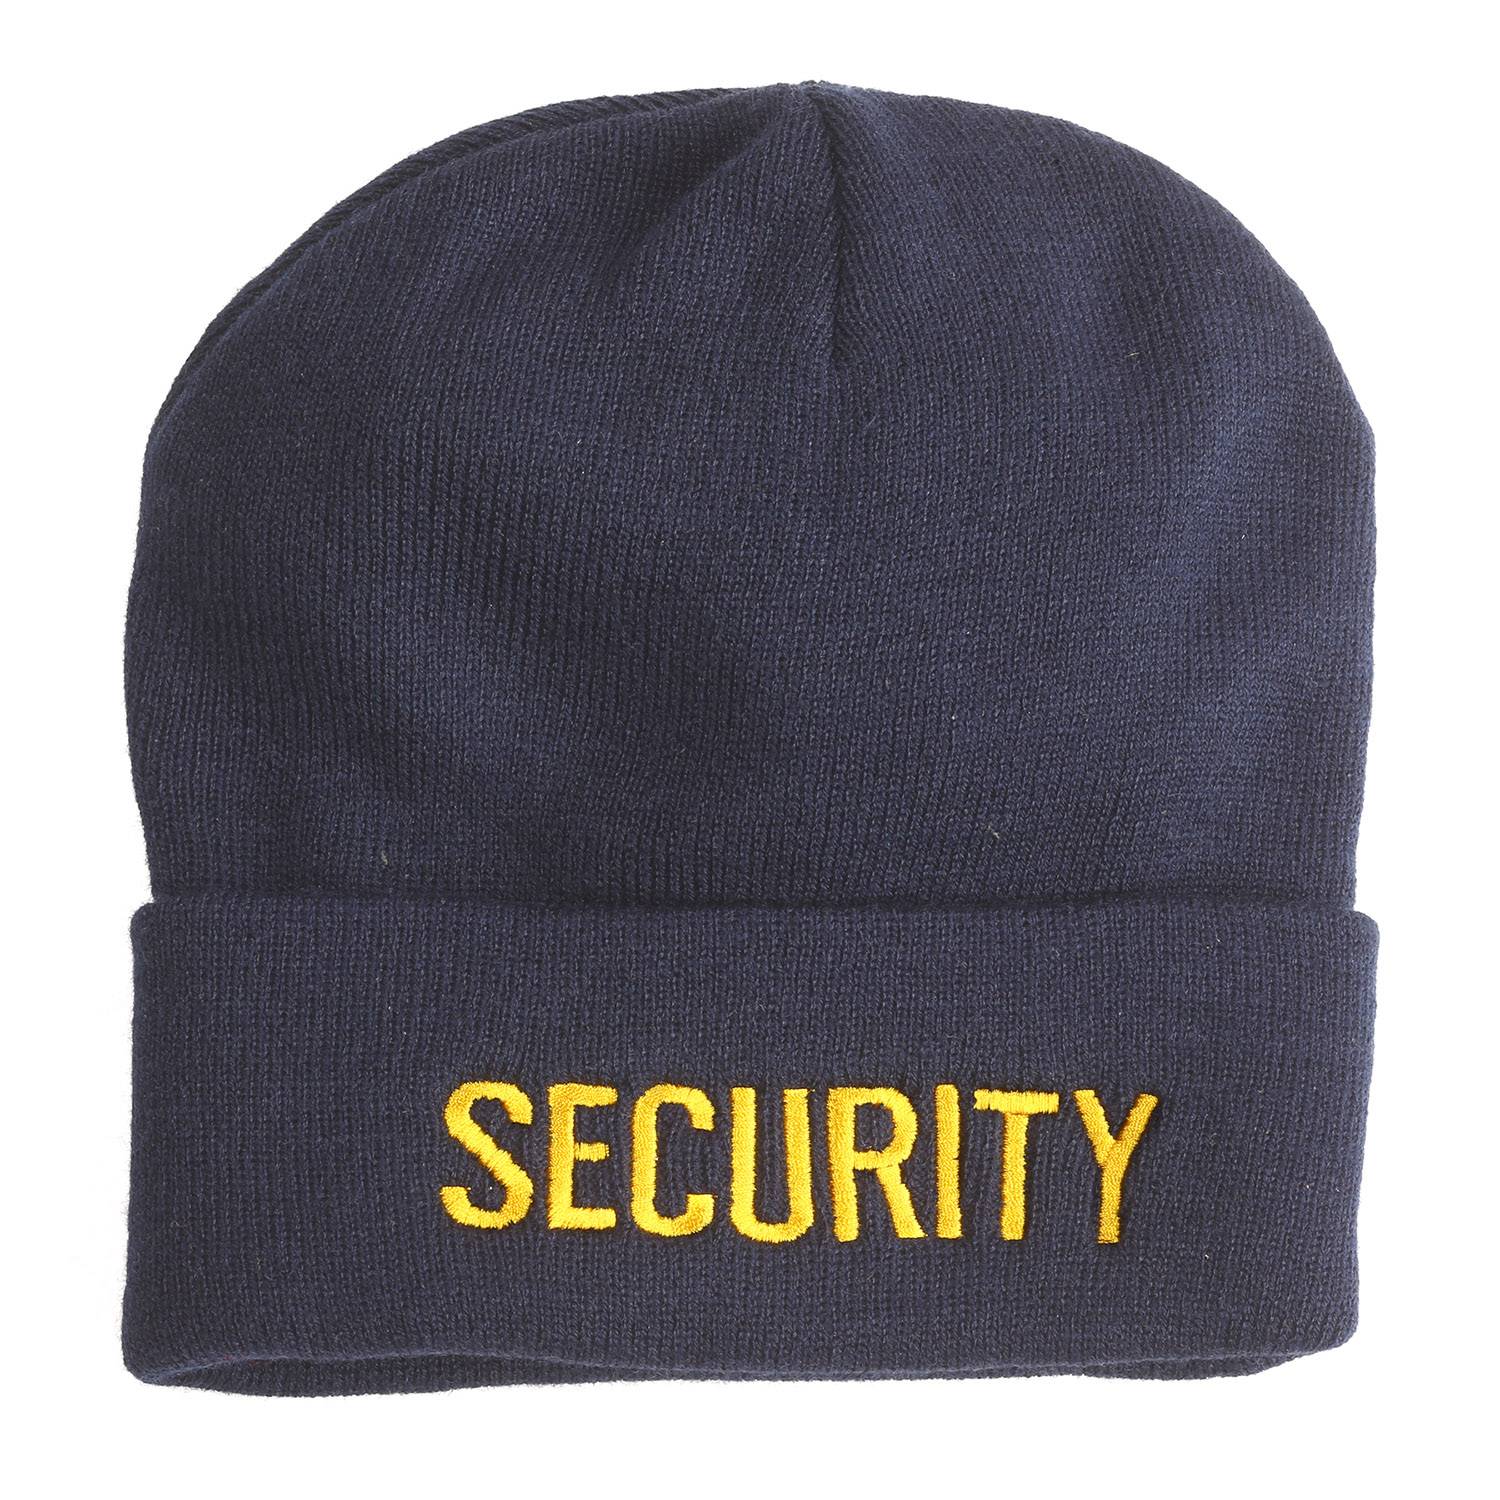 LAWPRO EMBROIDERED SECURITY WATCH CAP